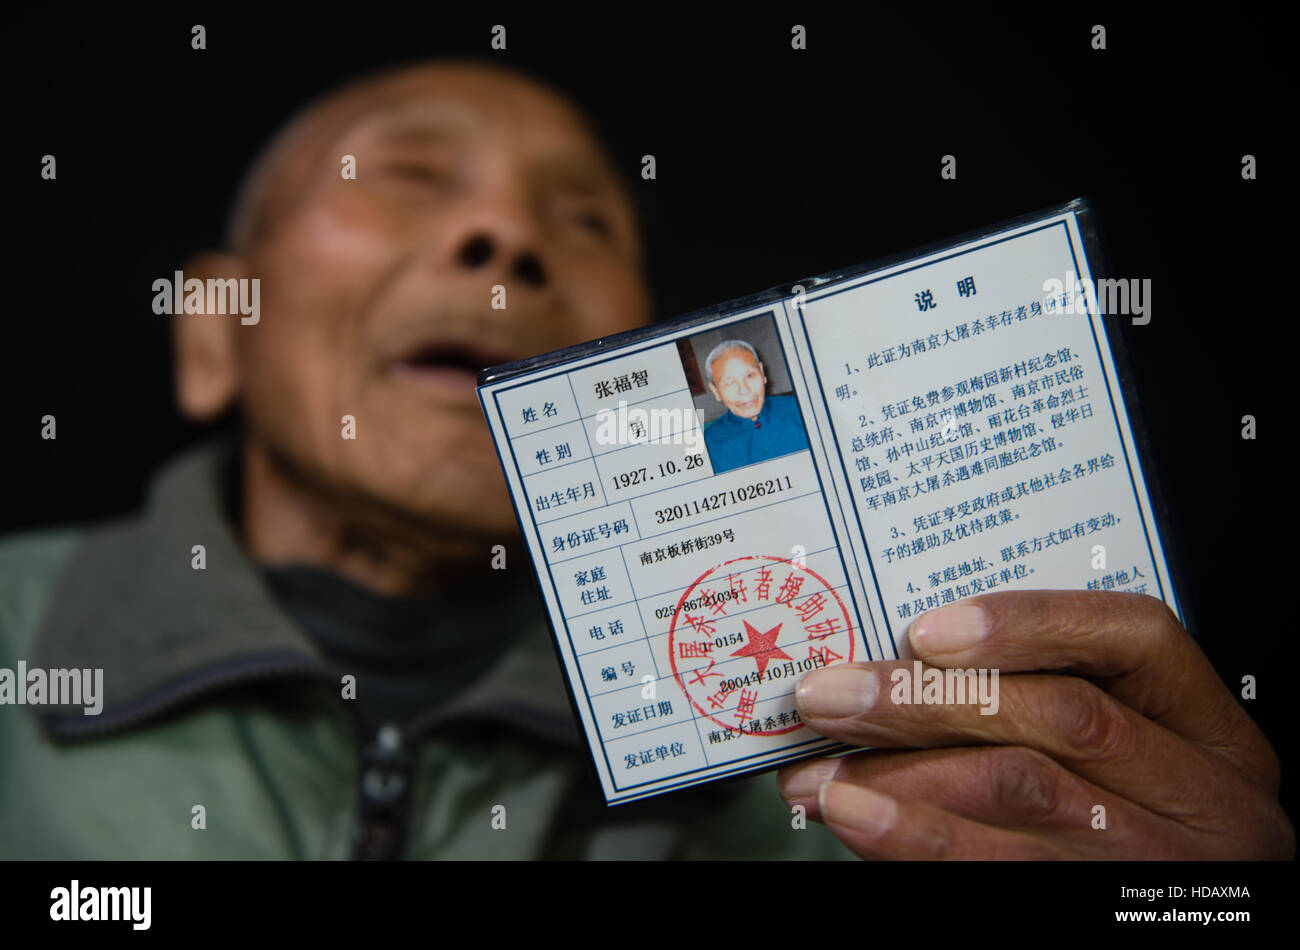 (161211) -- NANJING, Dec. 11, 2016 (Xinhua) -- Zhang Fuzhi demonstrates a certificate of survivors of the Nanjing Massacre, Nov. 16, 2016. Zhang Fuzhi, born in October of 1927, was beat up by invading Japanese soldiers in 1937. His right eye went blind. He passed away on Nov. 26, 2016. Japanese troops occupied eastern China's Nanjing on Dec. 13, 1937, and began a six-week massacre. Chinese records show more than 300,000 people -- not only disarmed soldiers but also civilians -- were brutally murdered and thousands of women raped. In the past 79 years, the number of survivors decreases. After Z Stock Photo